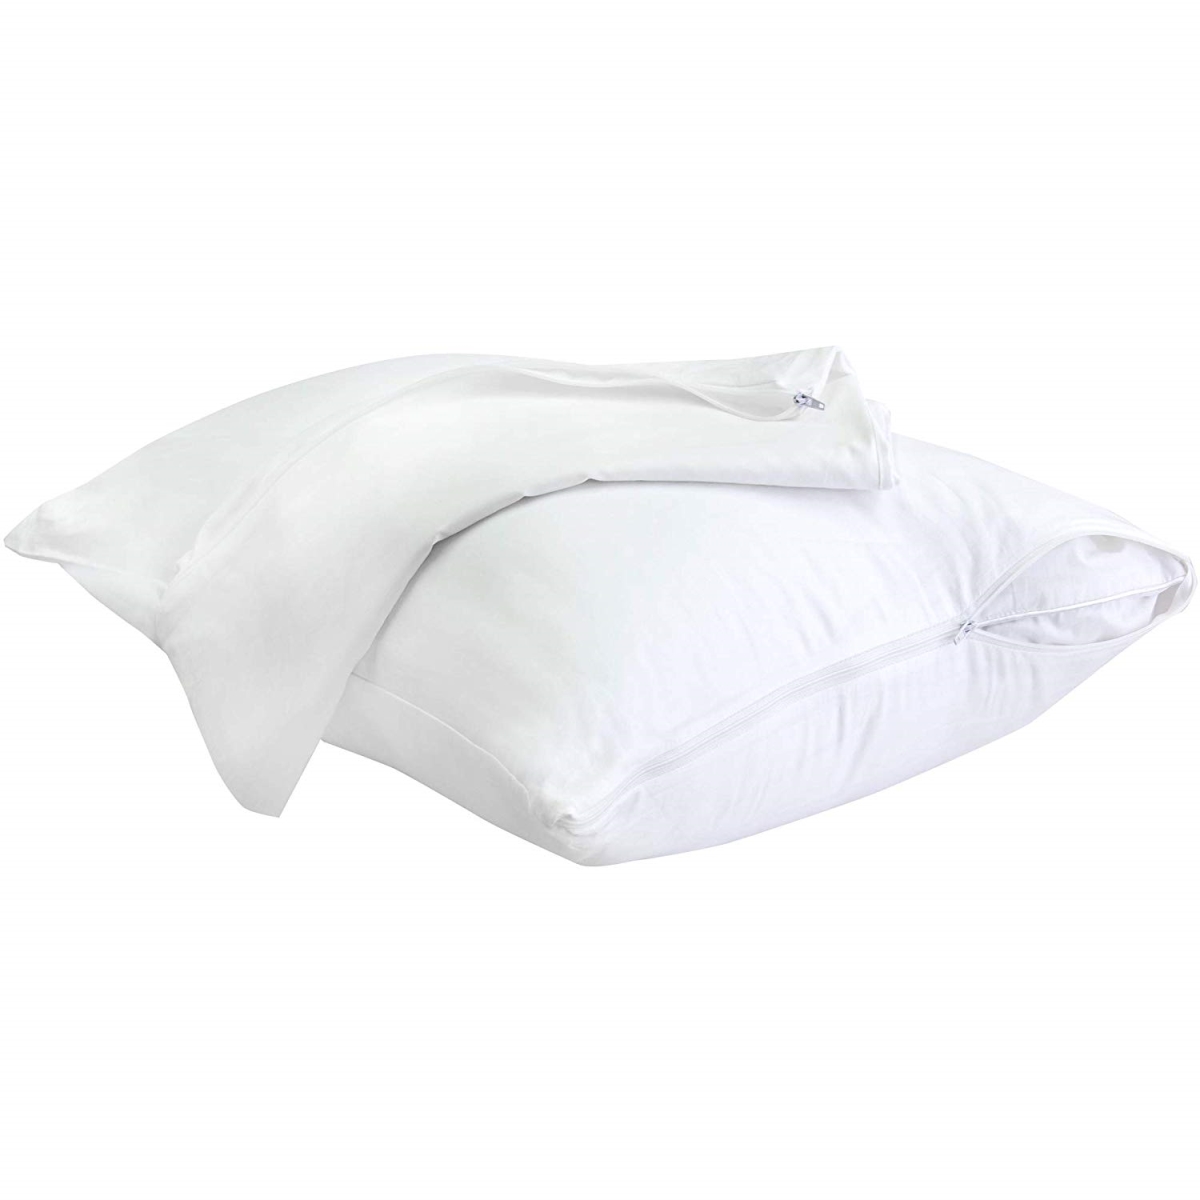 733416 Sleep Solutions By Stain Resistant Cotton Pillow Protector - White, Queen Size - Pack Of 2